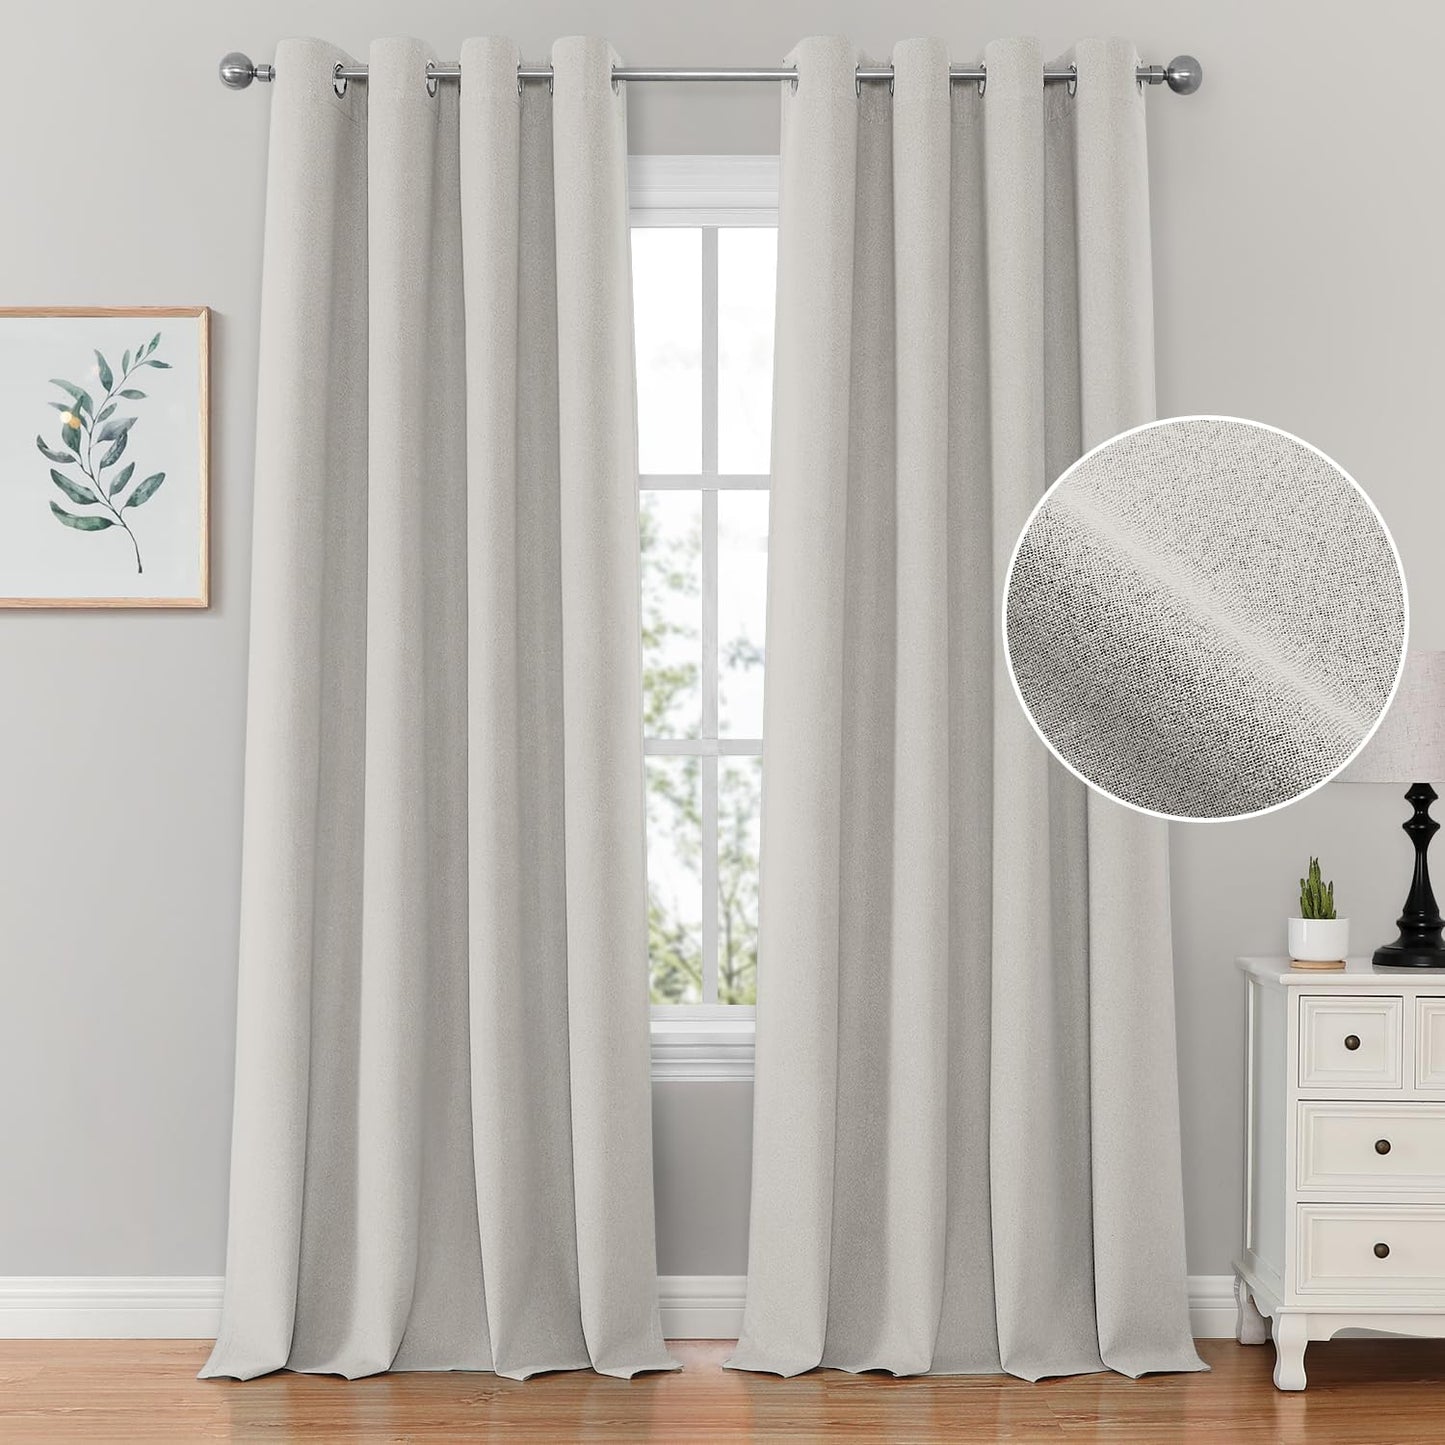 HOMEIDEAS 100% Blush Pink Linen Blackout Curtains for Bedroom, 52 X 84 Inch Room Darkening Curtains for Living, Faux Linen Thermal Insulated Full Black Out Grommet Window Curtains/Drapes  HOMEIDEAS Light Beige W52" X L84" 